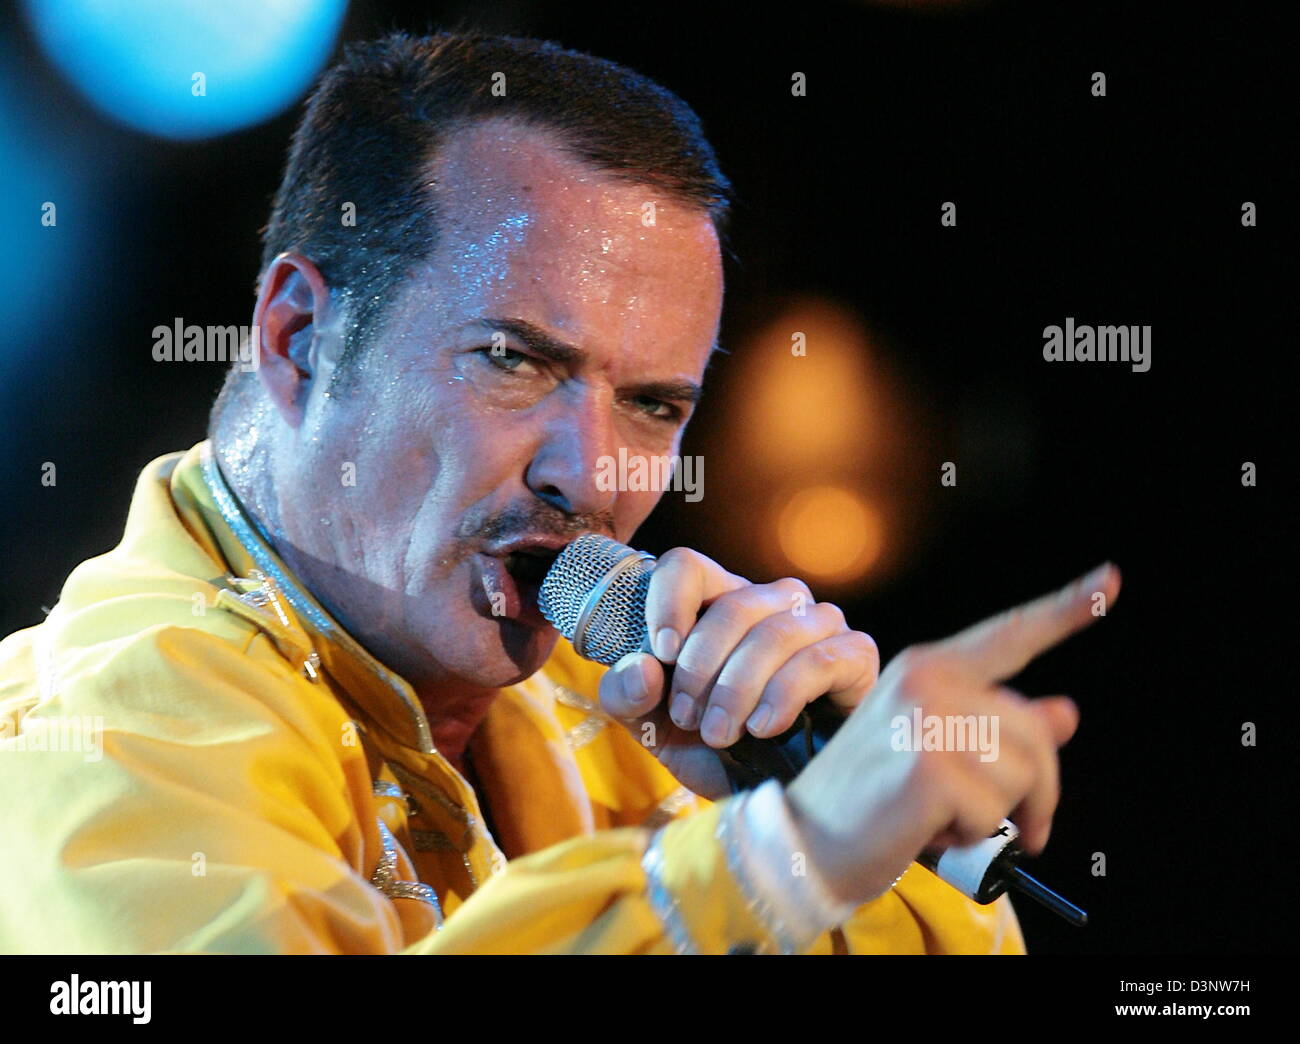 Freddy-Mercury-imitator Craig Pesco sings during the Queen show 'It's A Kinda Magic!' in Hamburg, Germany, Tuesday, 4 July 2006. The show premieres on 11 July. Based on the recordbeating Queen World Tour of 1986 Fresco and the musicians will stage the famous Queen hits such as 'The Show Must Go On', 'We Are The Champions' or 'We Will Rock You' until 13 August. Photo: Sebastian Widm Stock Photo